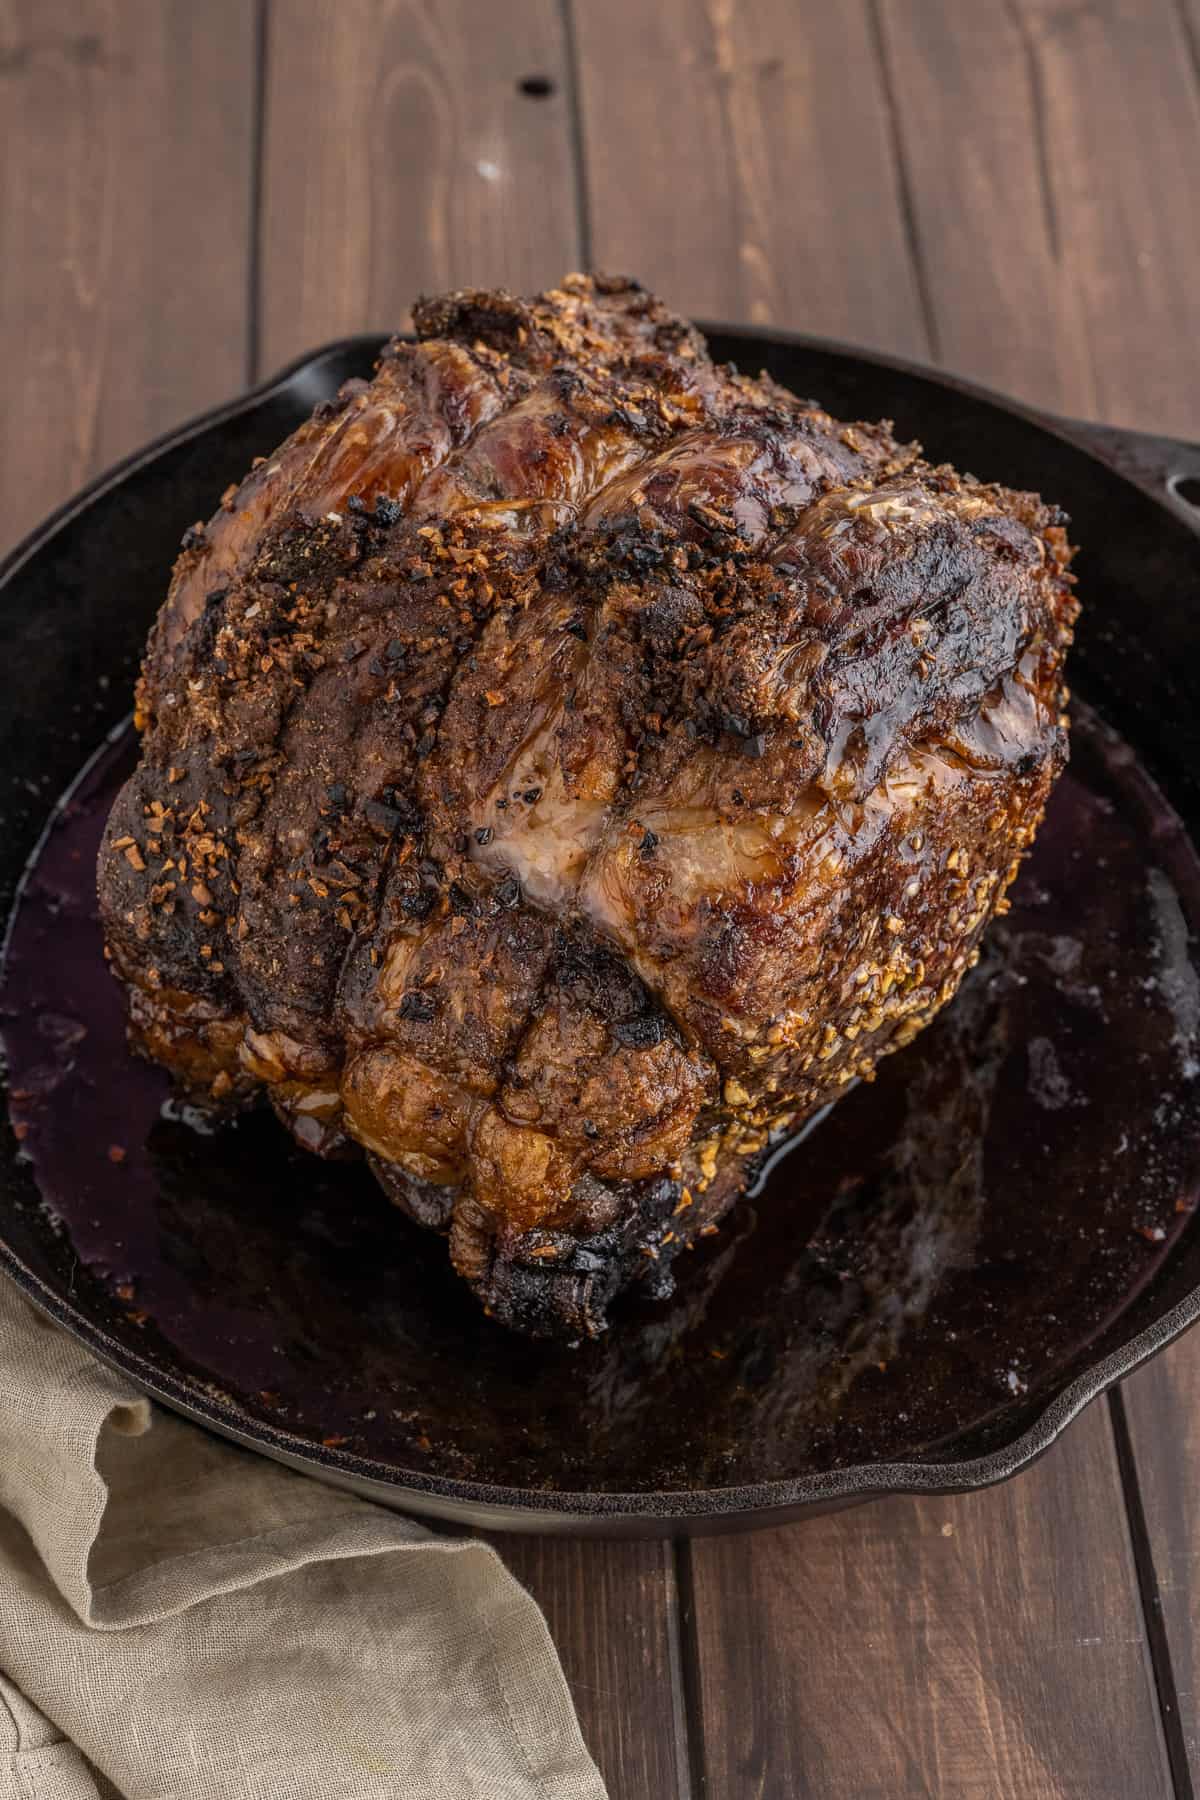 A cooked prime rib in a pan.